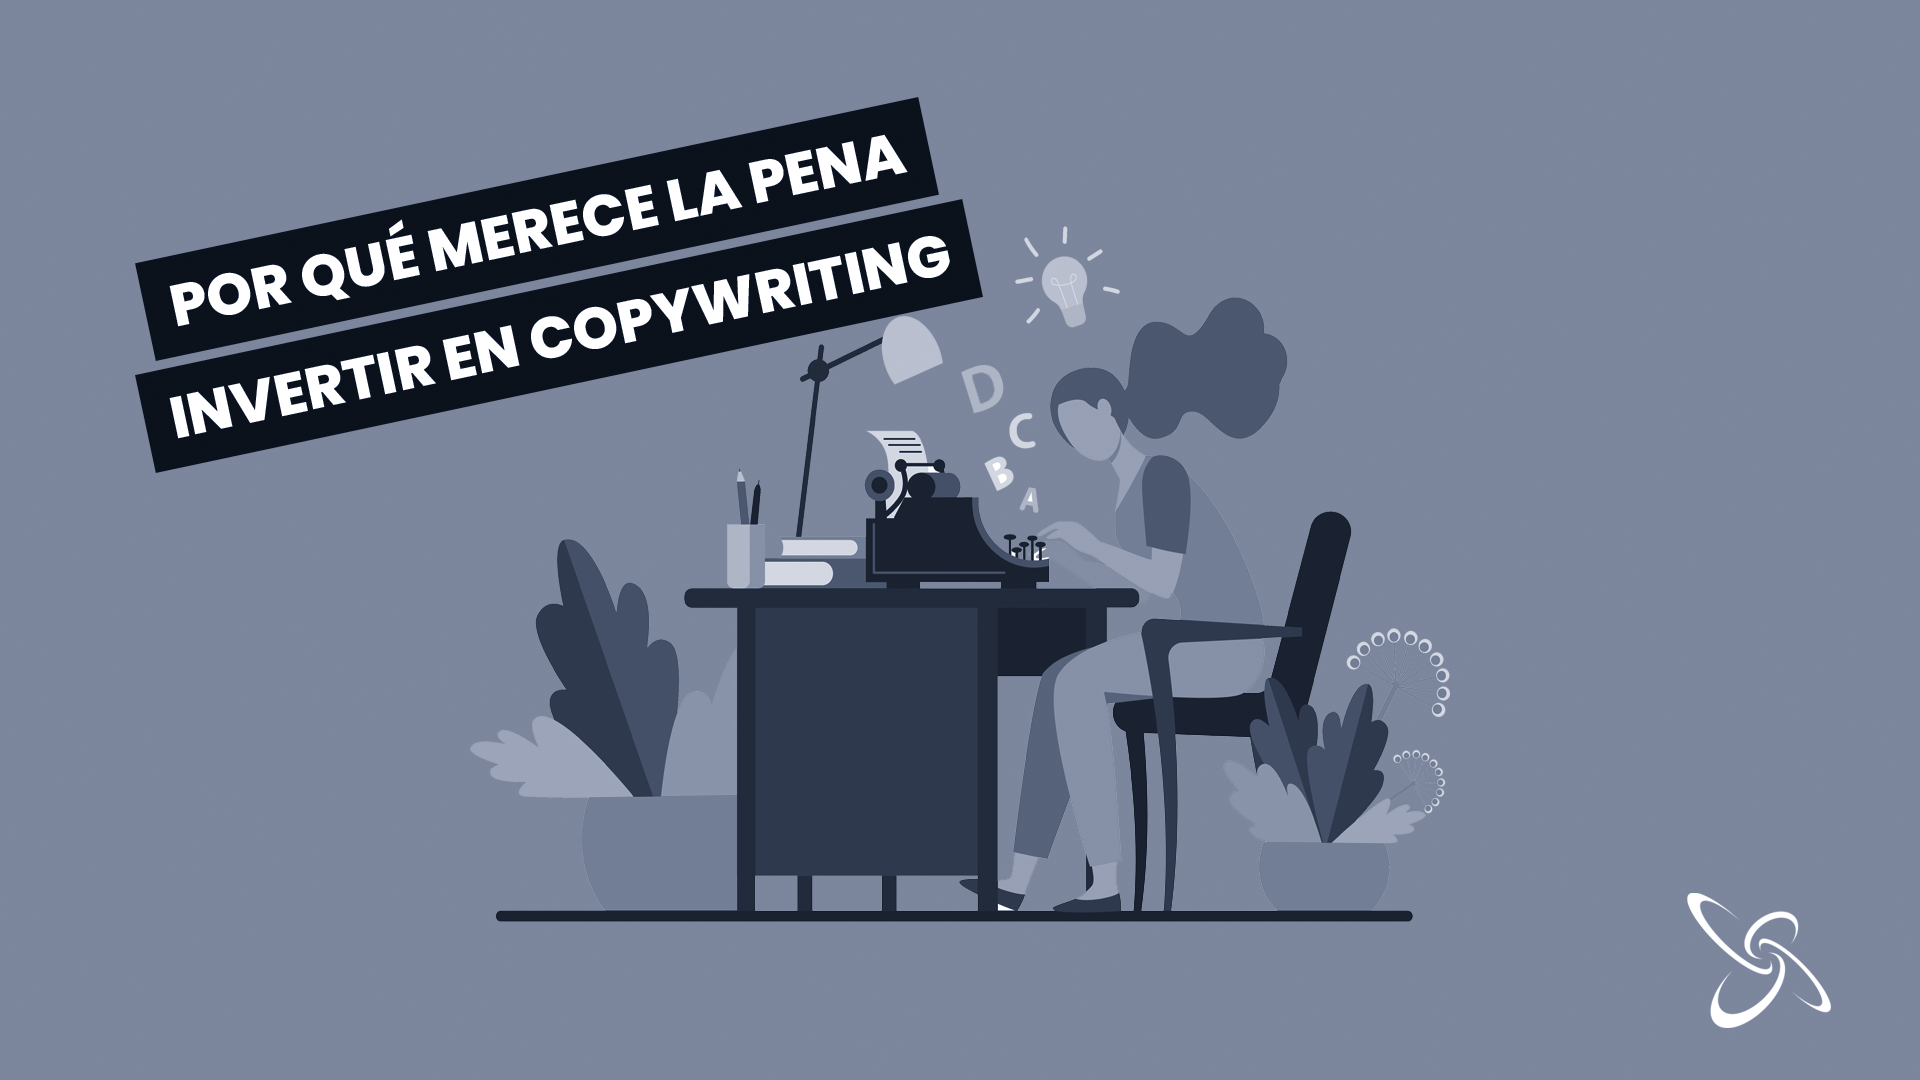 Why is it worth investing in copywriting